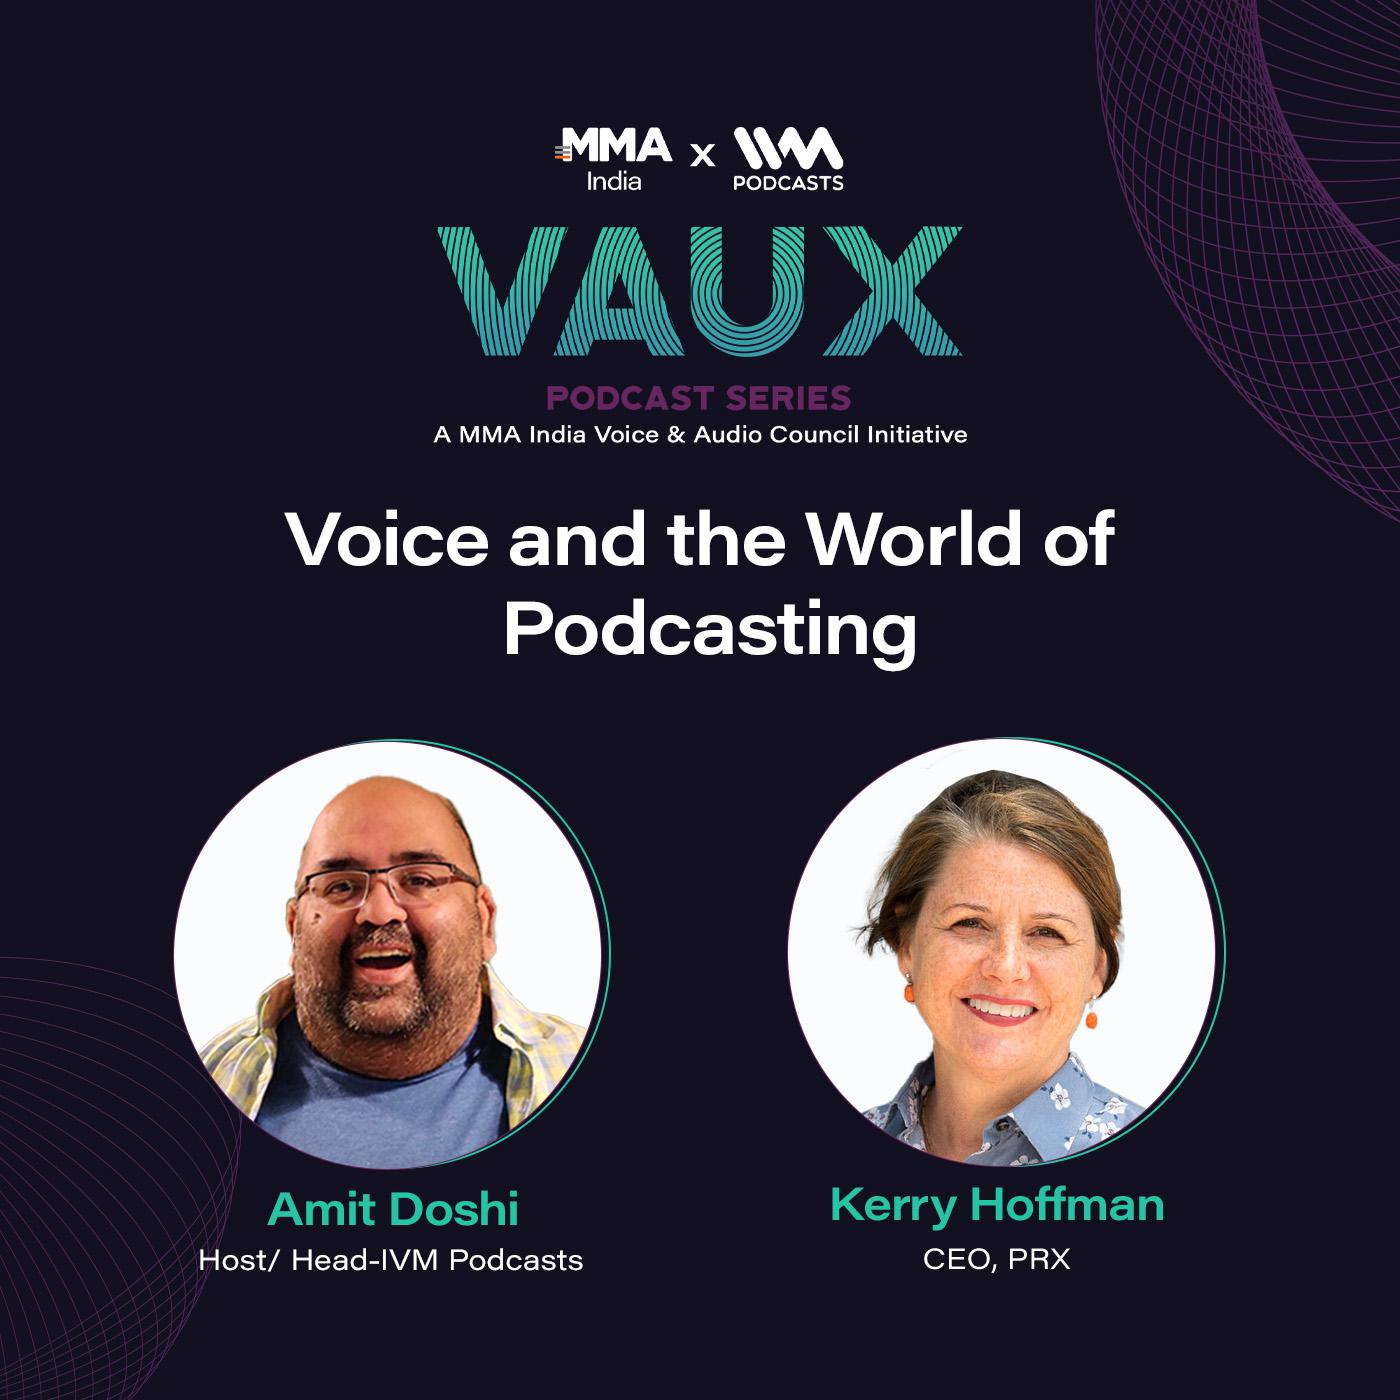 Voice and the World of Podcasting